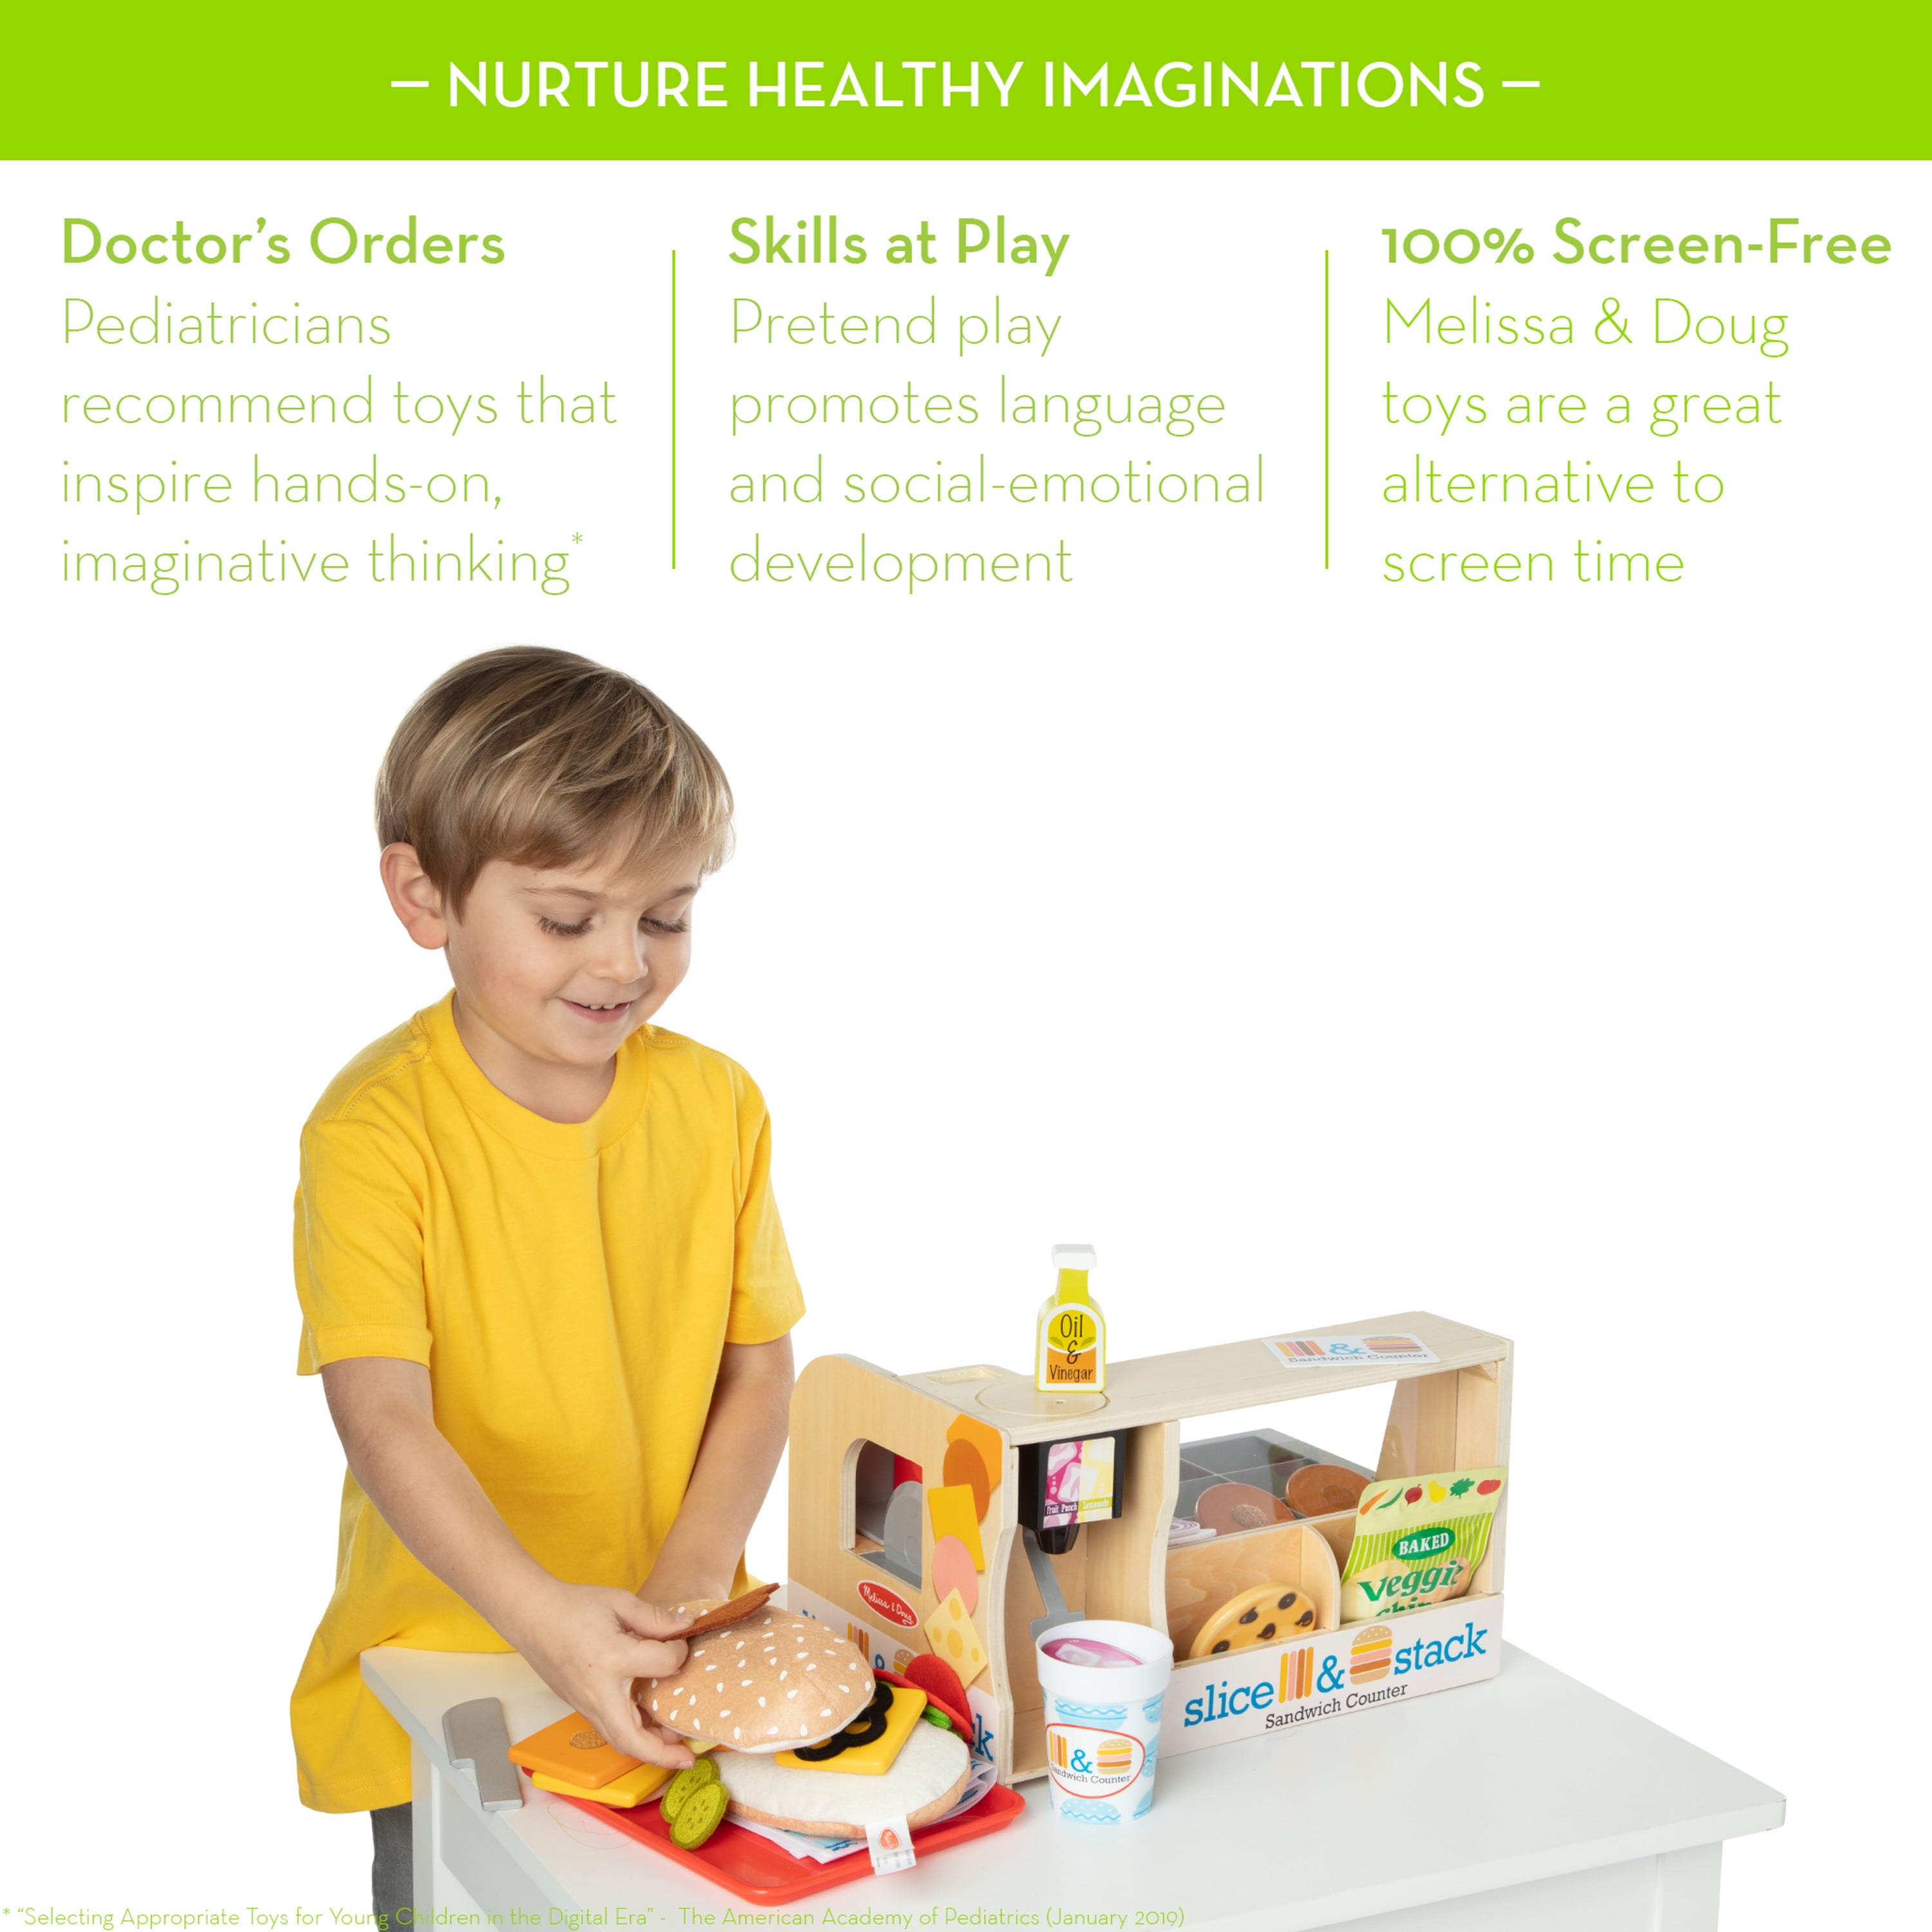 Melissa & Doug Wooden Slice & Stack Sandwich Counter with Deli Slicer –  56-Piece Pretend Play Food Pieces - FSC-Certified Materials 